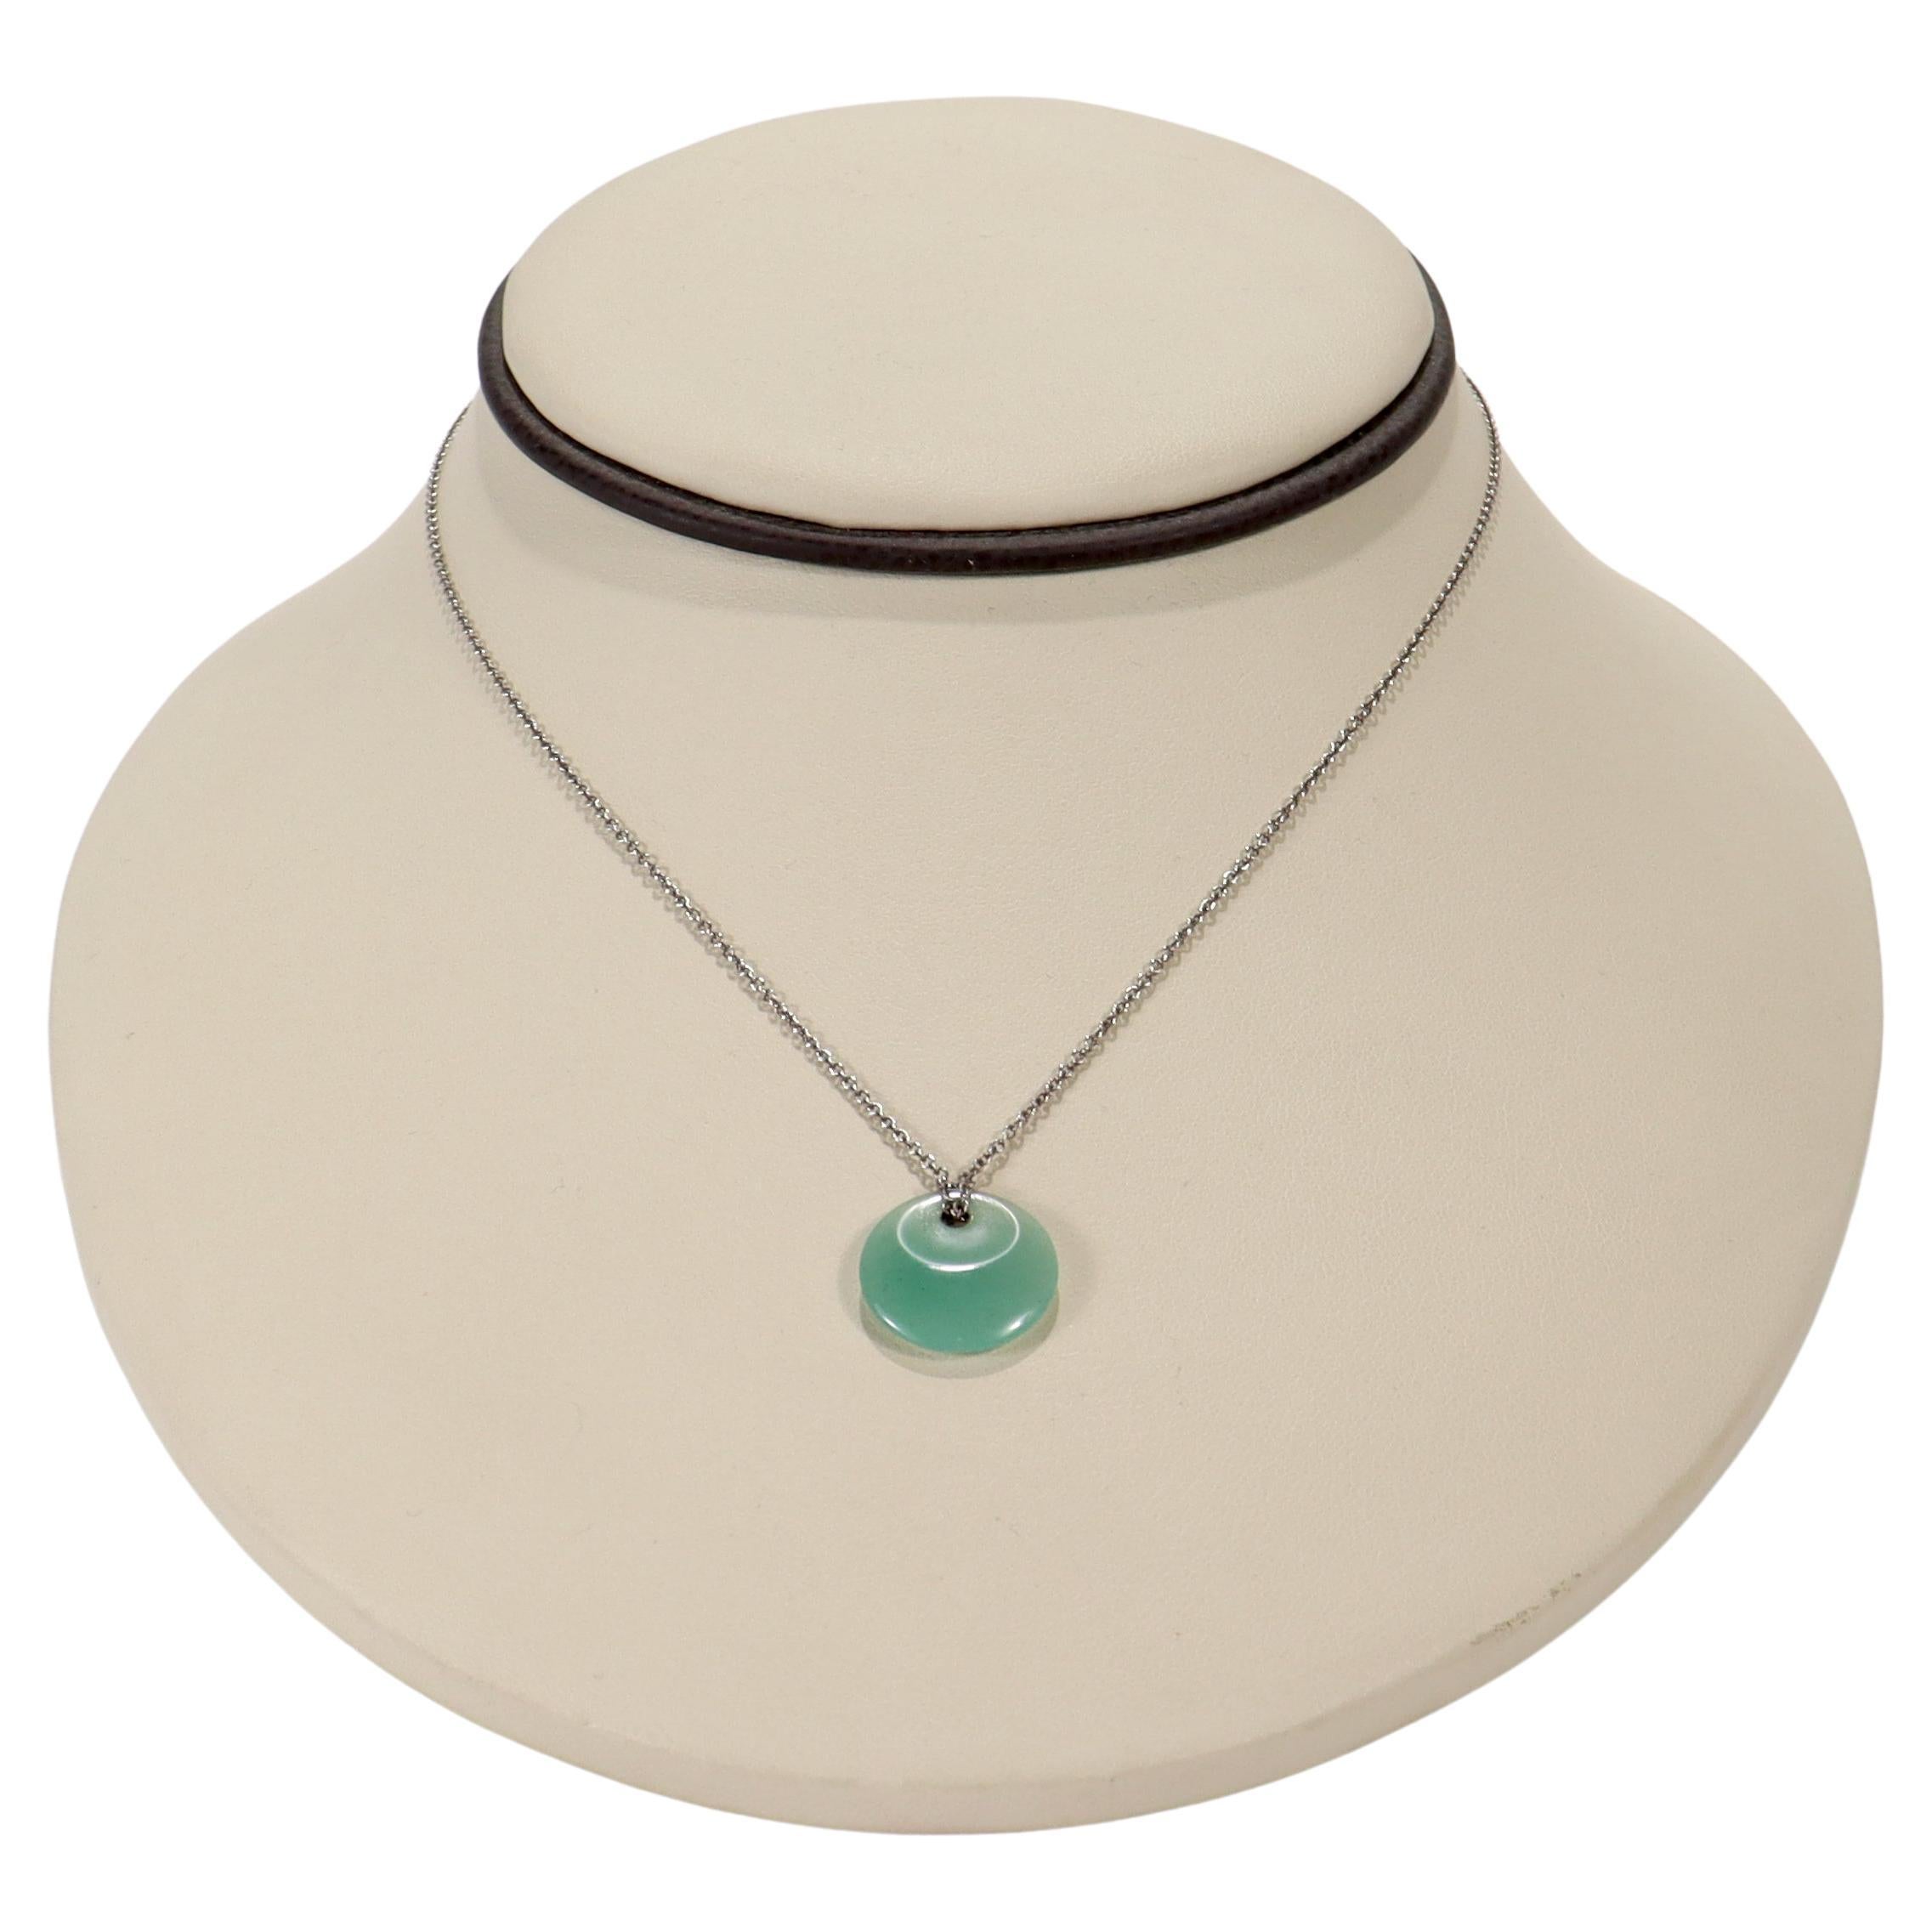 A fine Tiffany & Co. necklace. 

By Elsa Peretti for Tiffany & Co. 

In sterling silver with a small green aventurine quartz pendant.

Together with its original Tiffany leather pouch.

Simply a wonderful necklace!

Date:
Late 20th Century

Overall